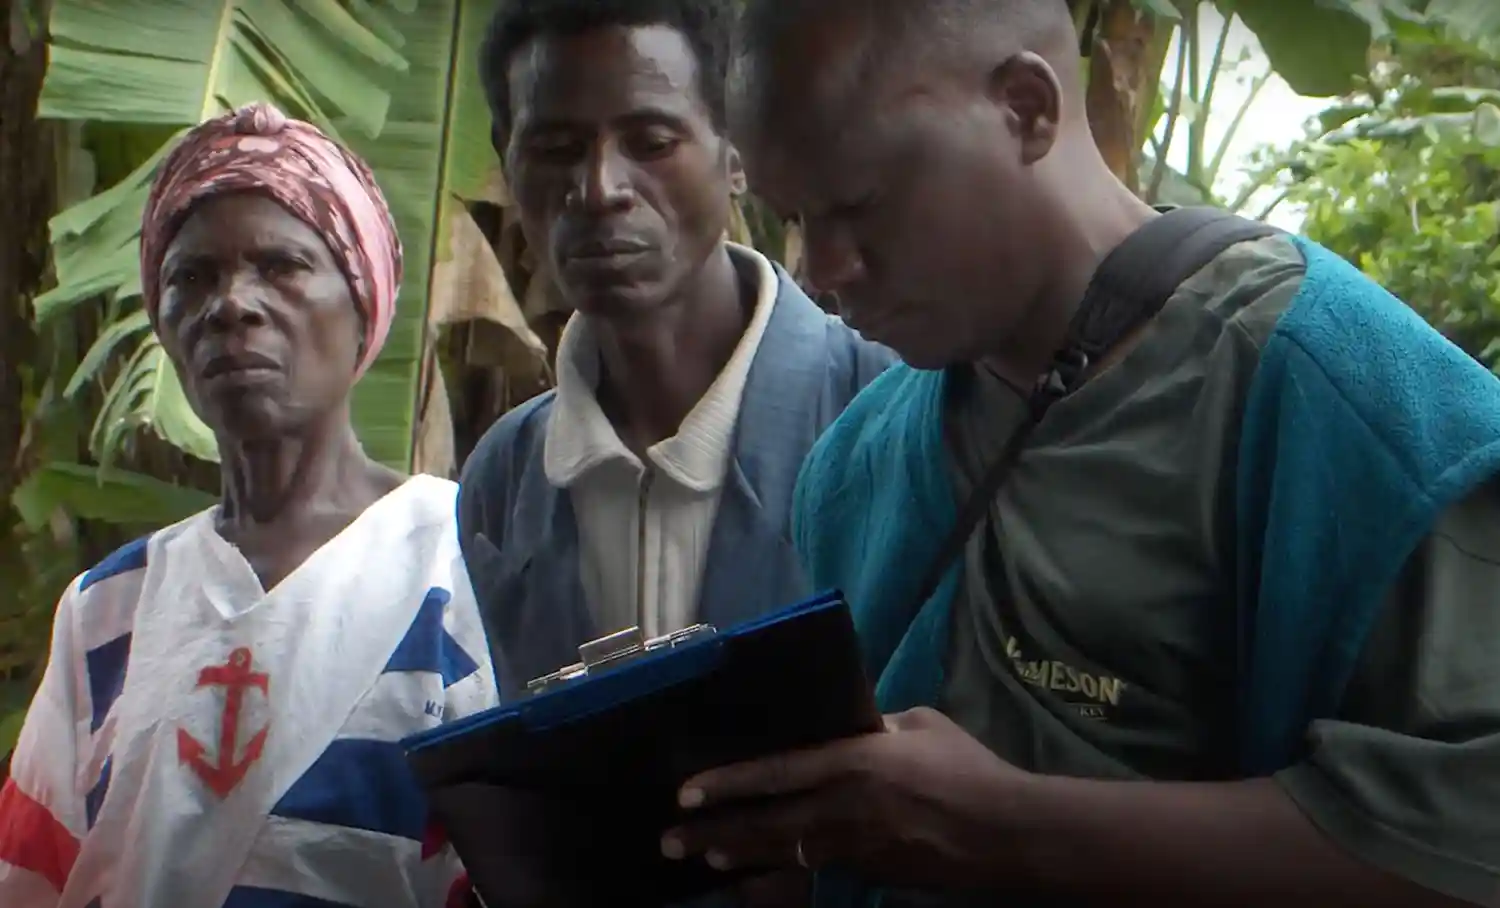 A health worker is writing on a clipboard while asking questions to a man and woman beside him.